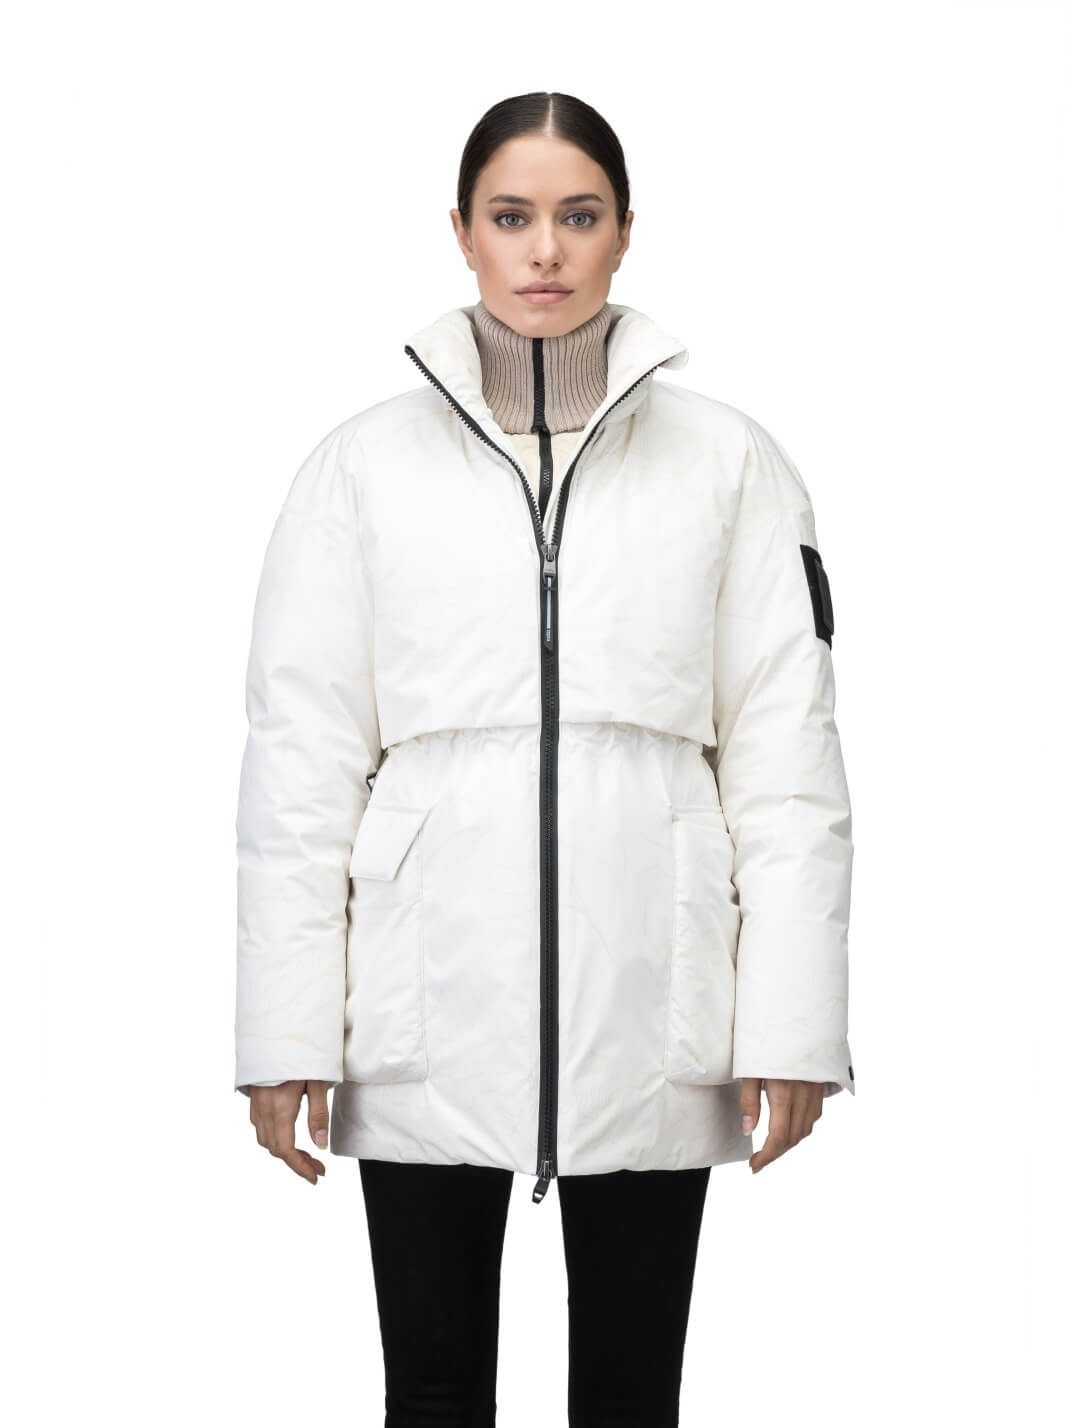 Haelyn Ladies Short Utility Parka in thigh length, 3-Ply Micro Denier fabrication, Premium Canadian White Duck Down insulation, removable down-filled hood, two-way centre front zipper, hidden adjustable cord at waist, adjustable snap cuffs, and four exterior patch pockets at front, in Wheat Desert